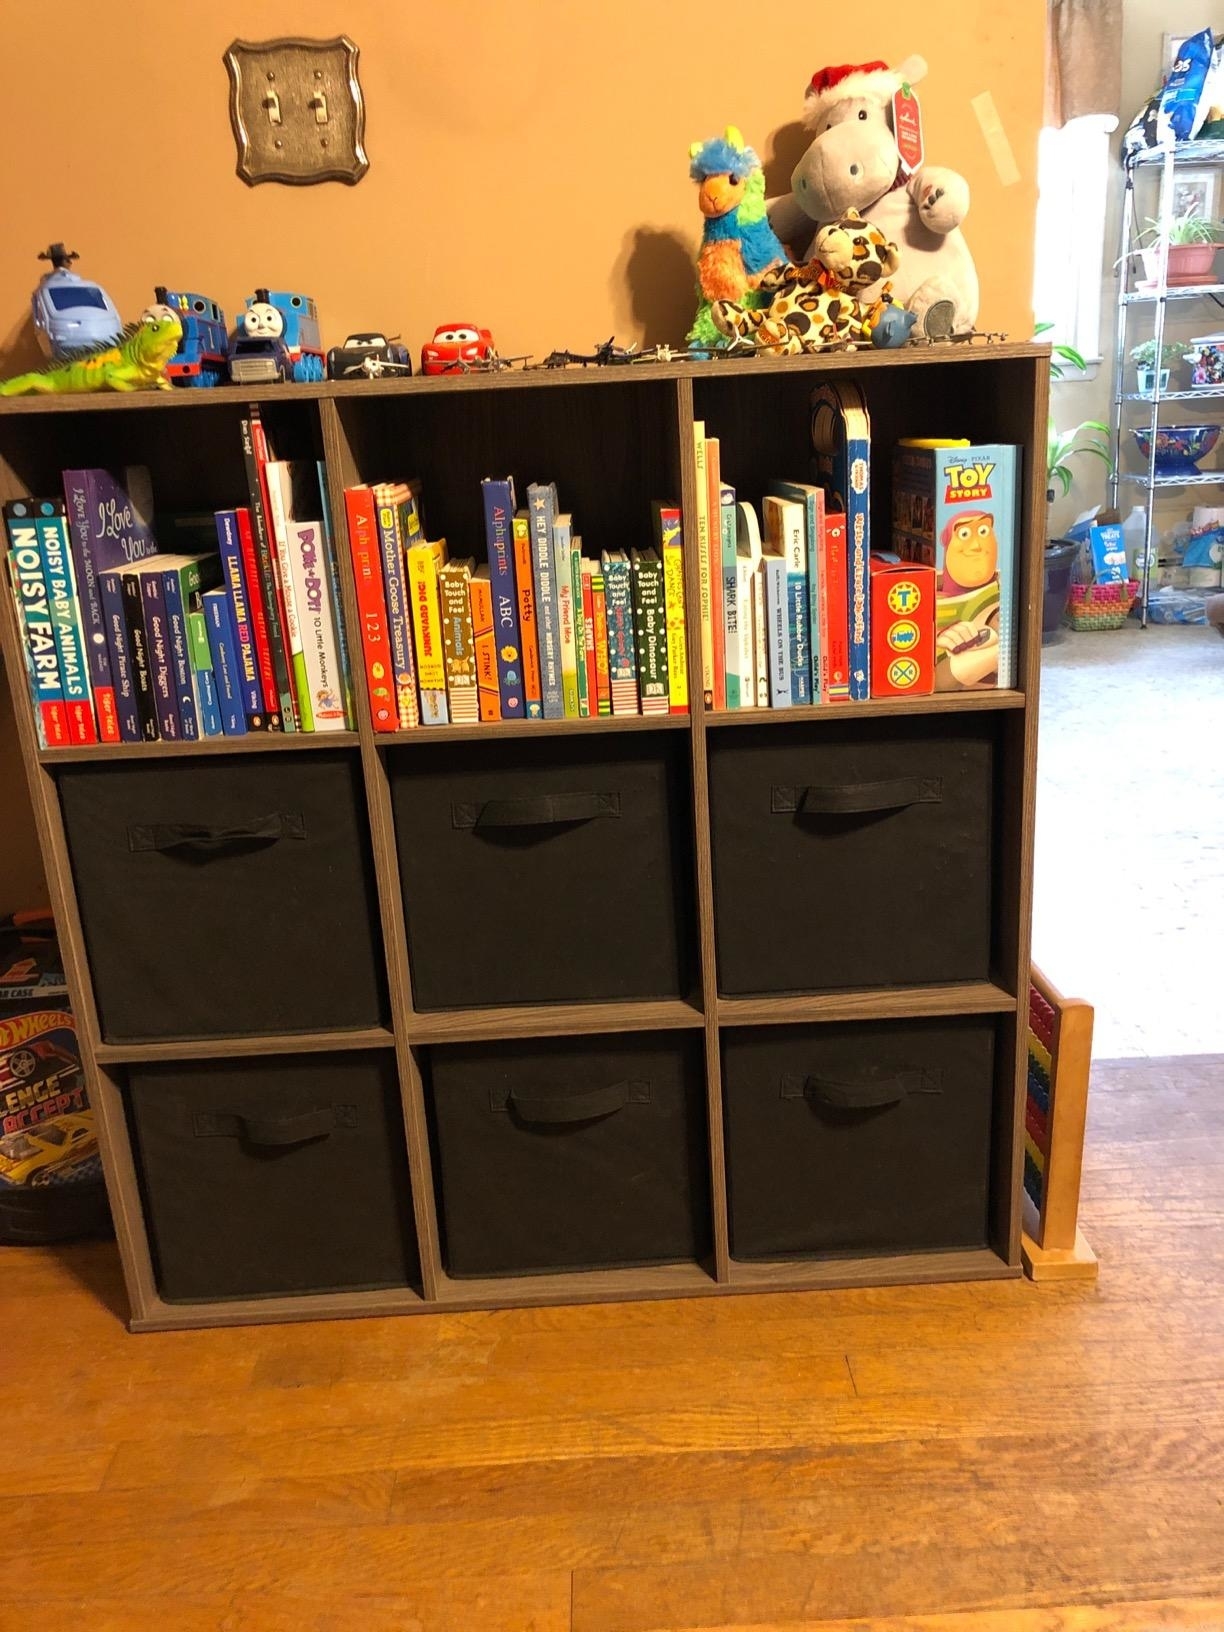 Bookshelf with children’s books and toys, including a Toy Story theme on top shelf